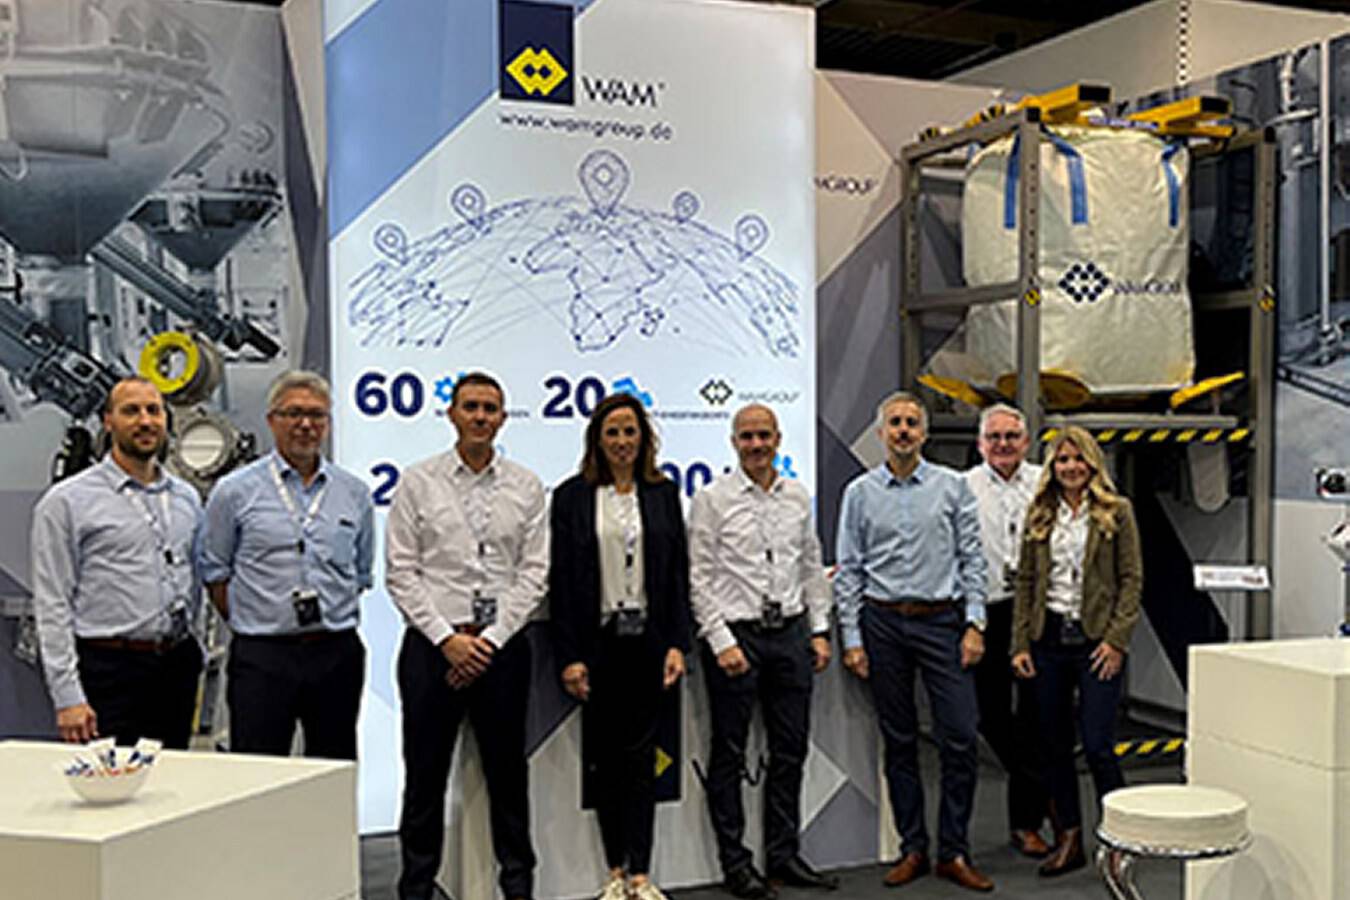 Impressions of WAM GmbH at PowTech 2022 WAM GmbH presented a selection of screw conveyors, dust collectors, micro-batch feeders, loading bellows and much more under its motto ”The one-stop-solution”.